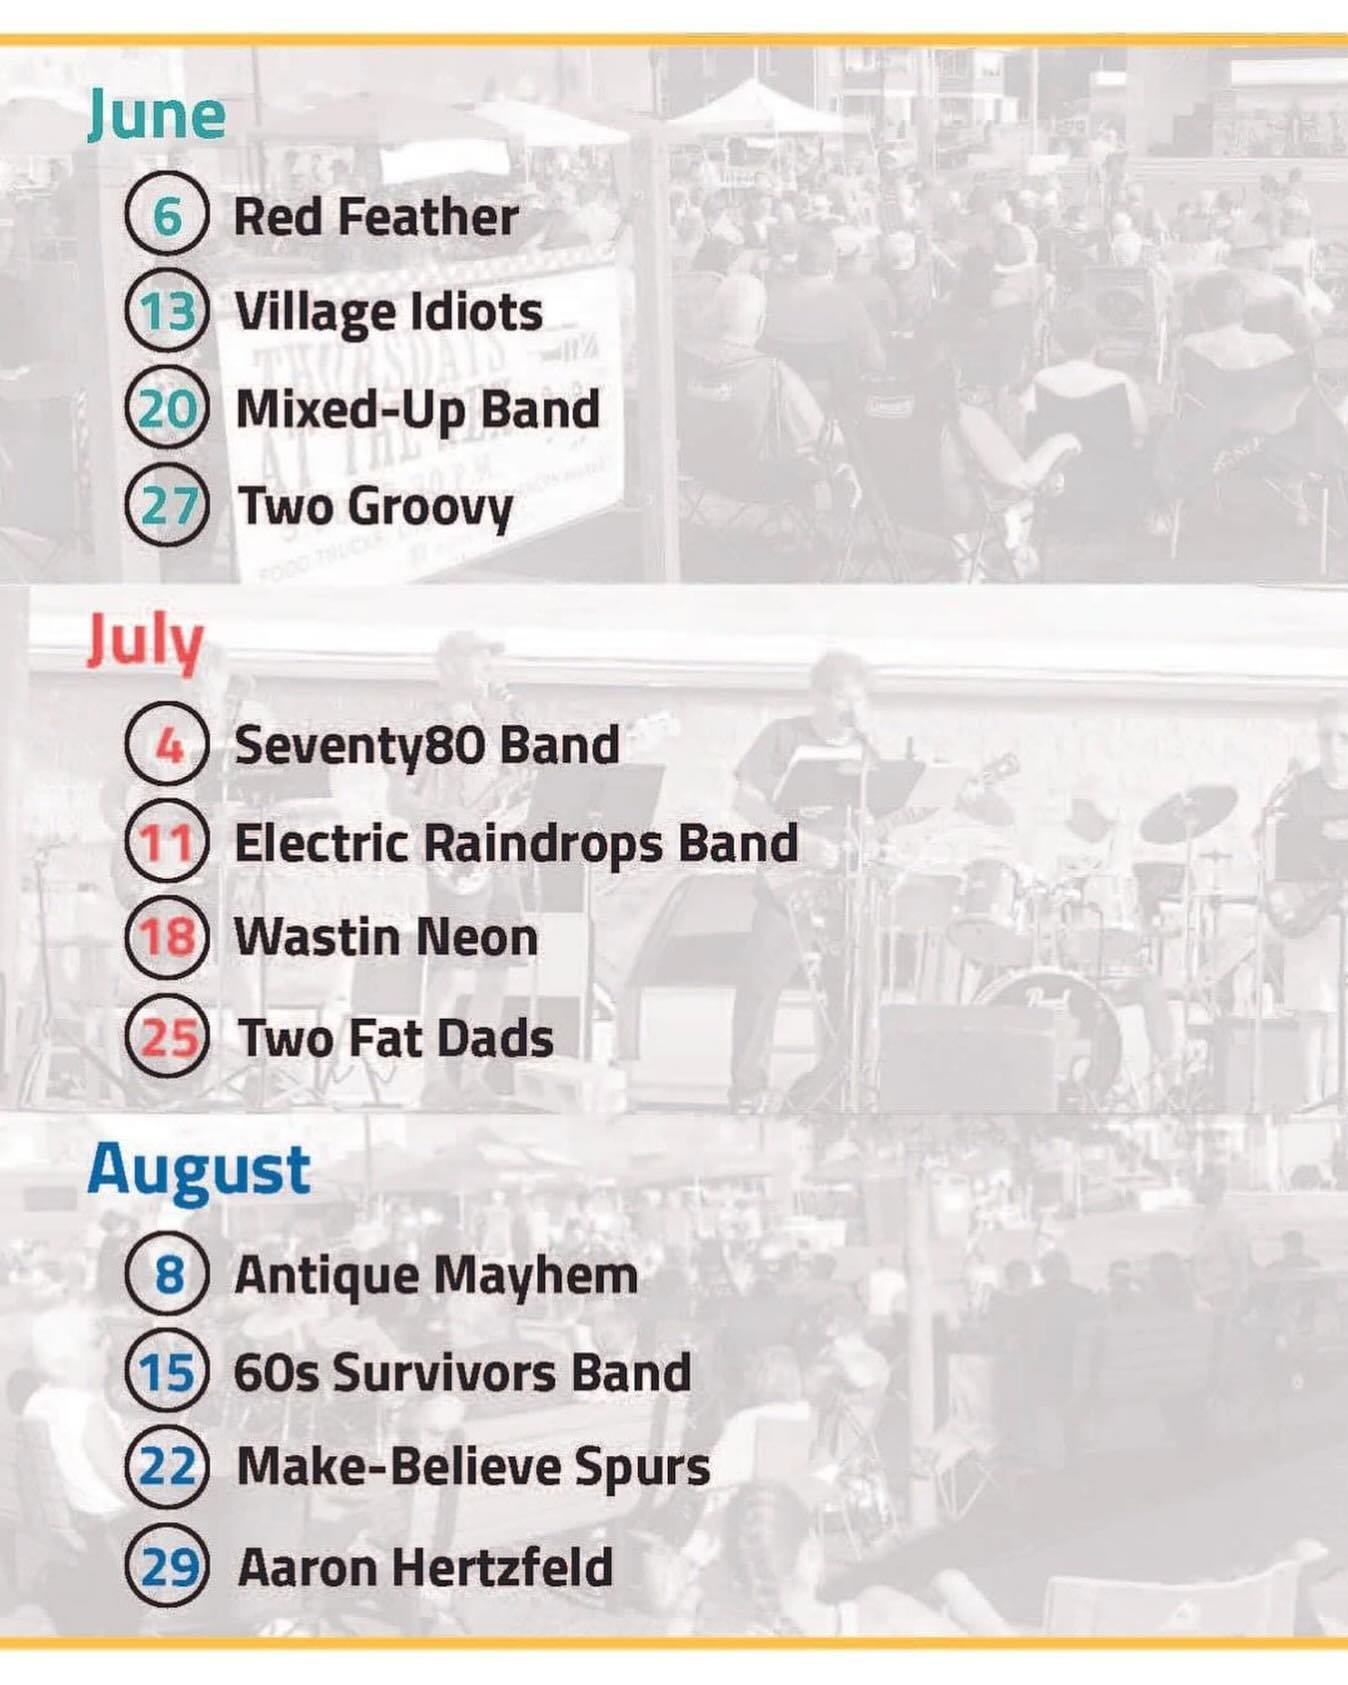 Schedule is out for the bands this summer for Thursdays at the Rex! Go to our Facebook events for all of the details!